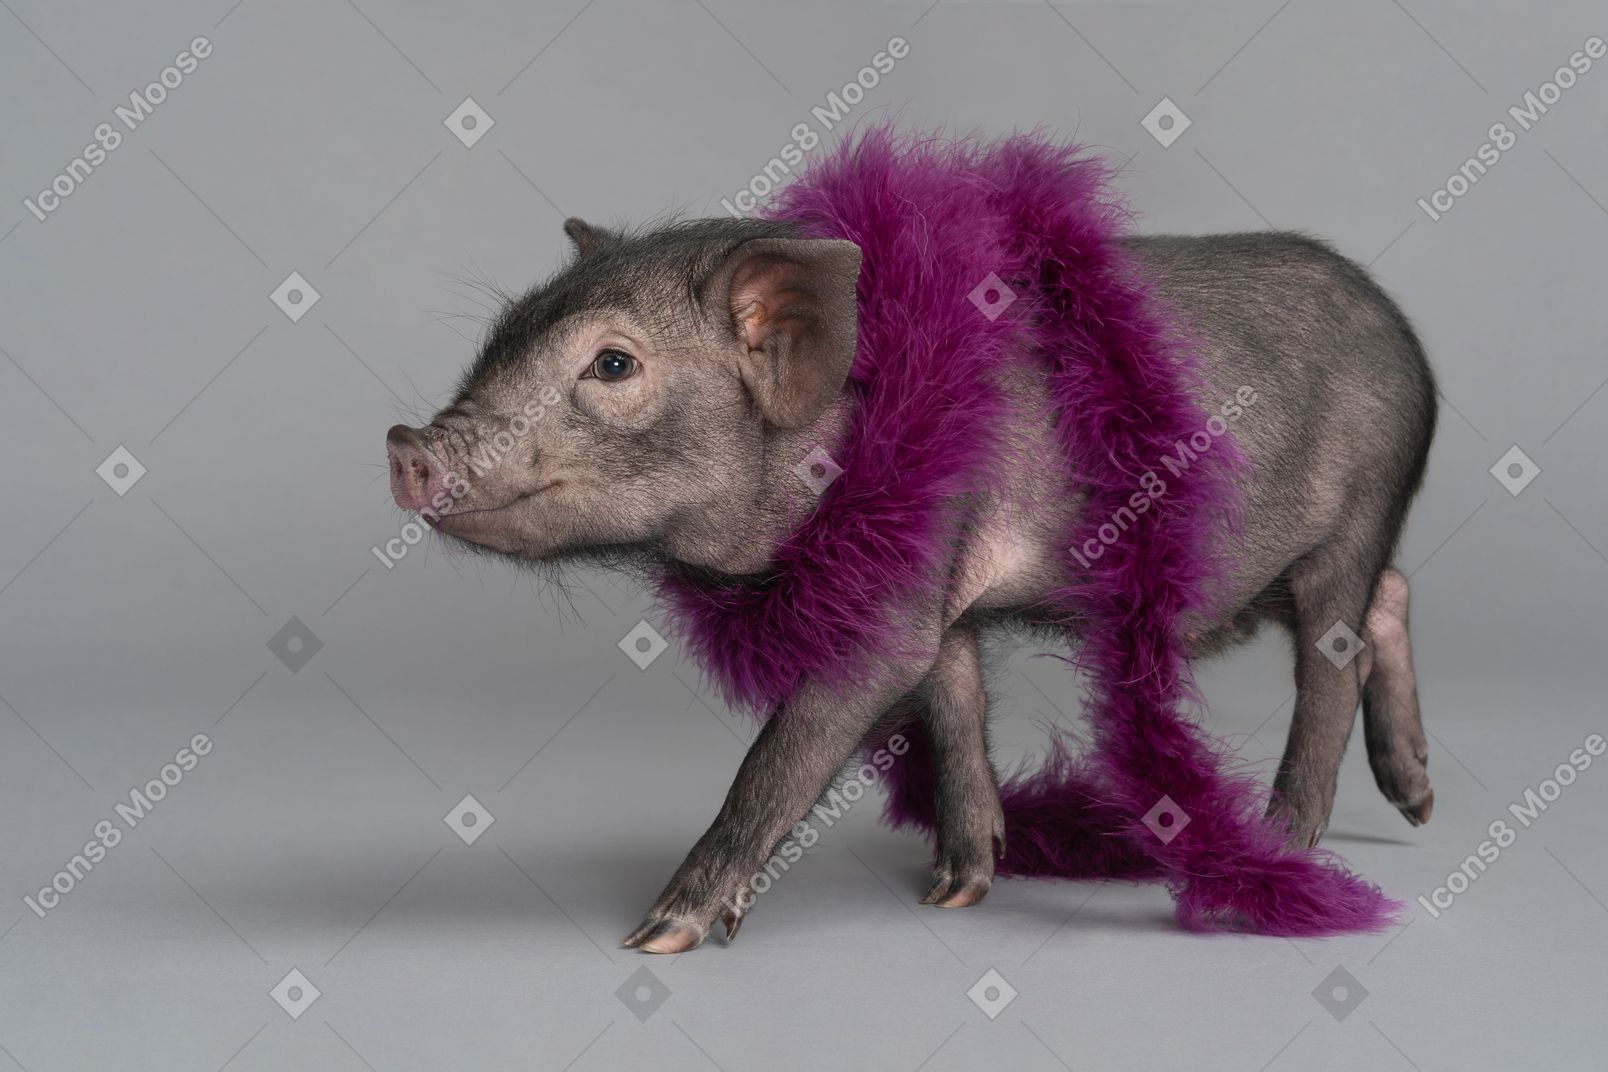 Cute little pig wearing a boa is going somewhere